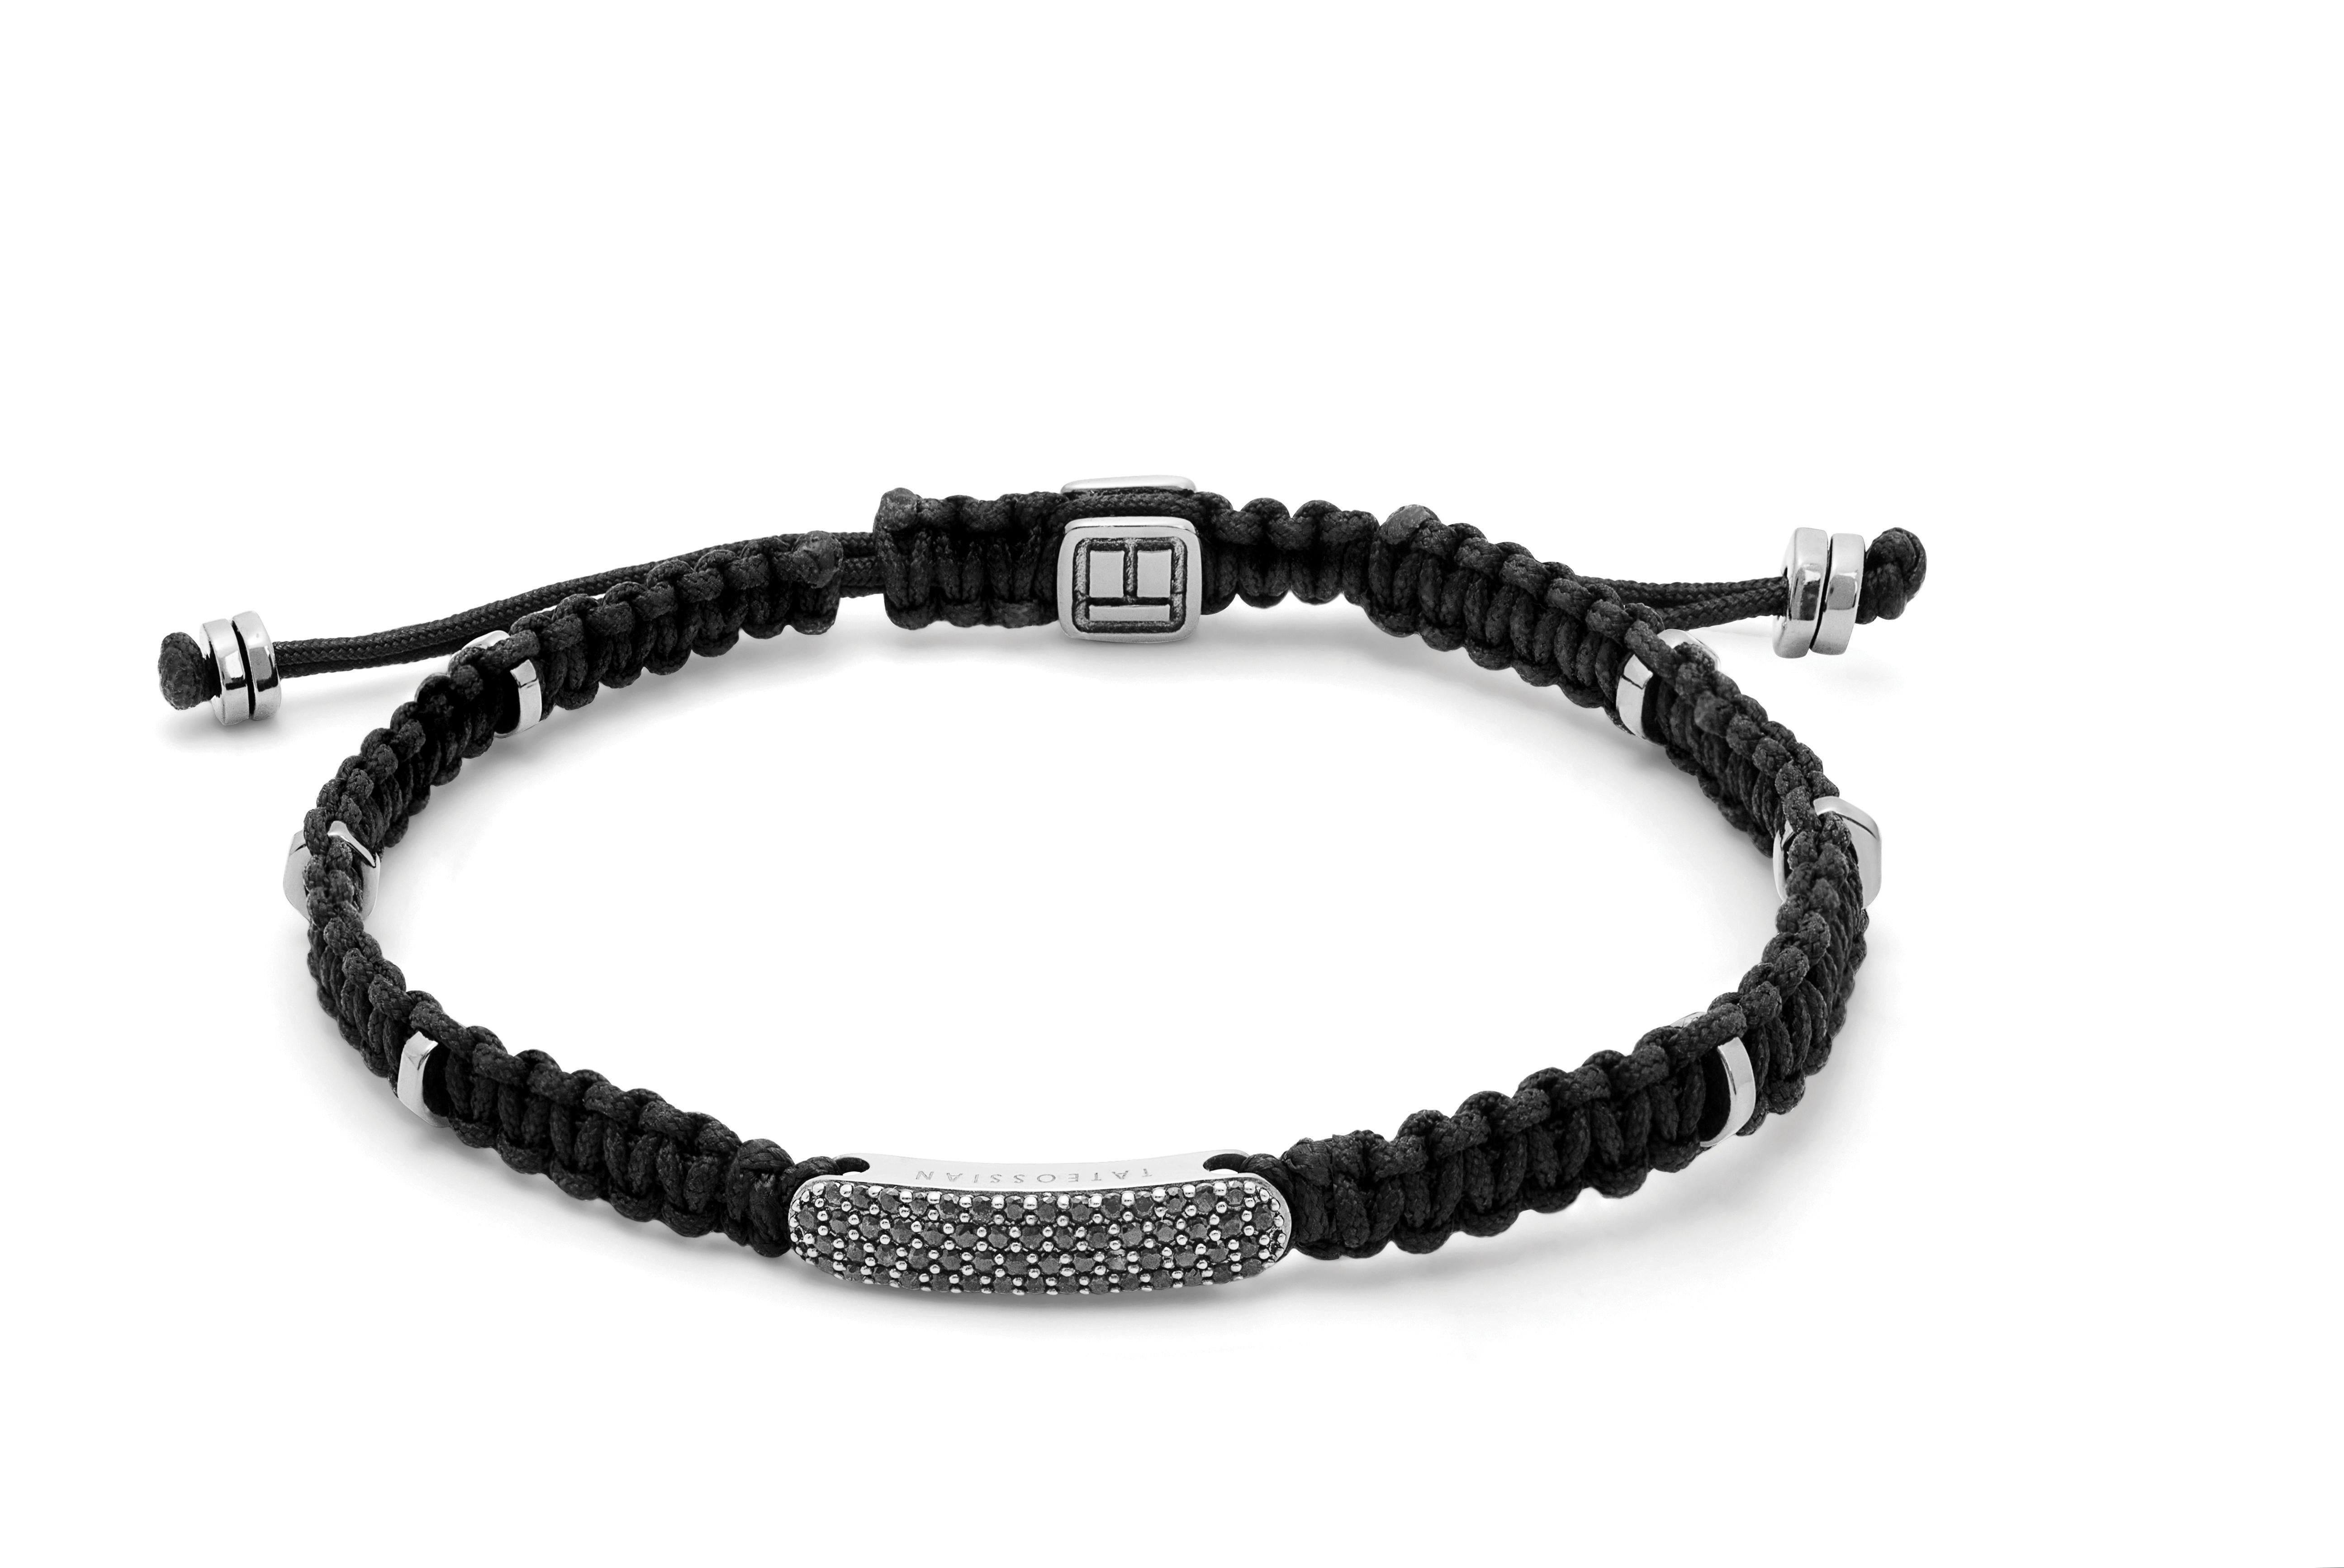 Black Diamond Baton Bracelet in Black Macramé and Sterling Silver, Size M In New Condition For Sale In Fulham business exchange, London